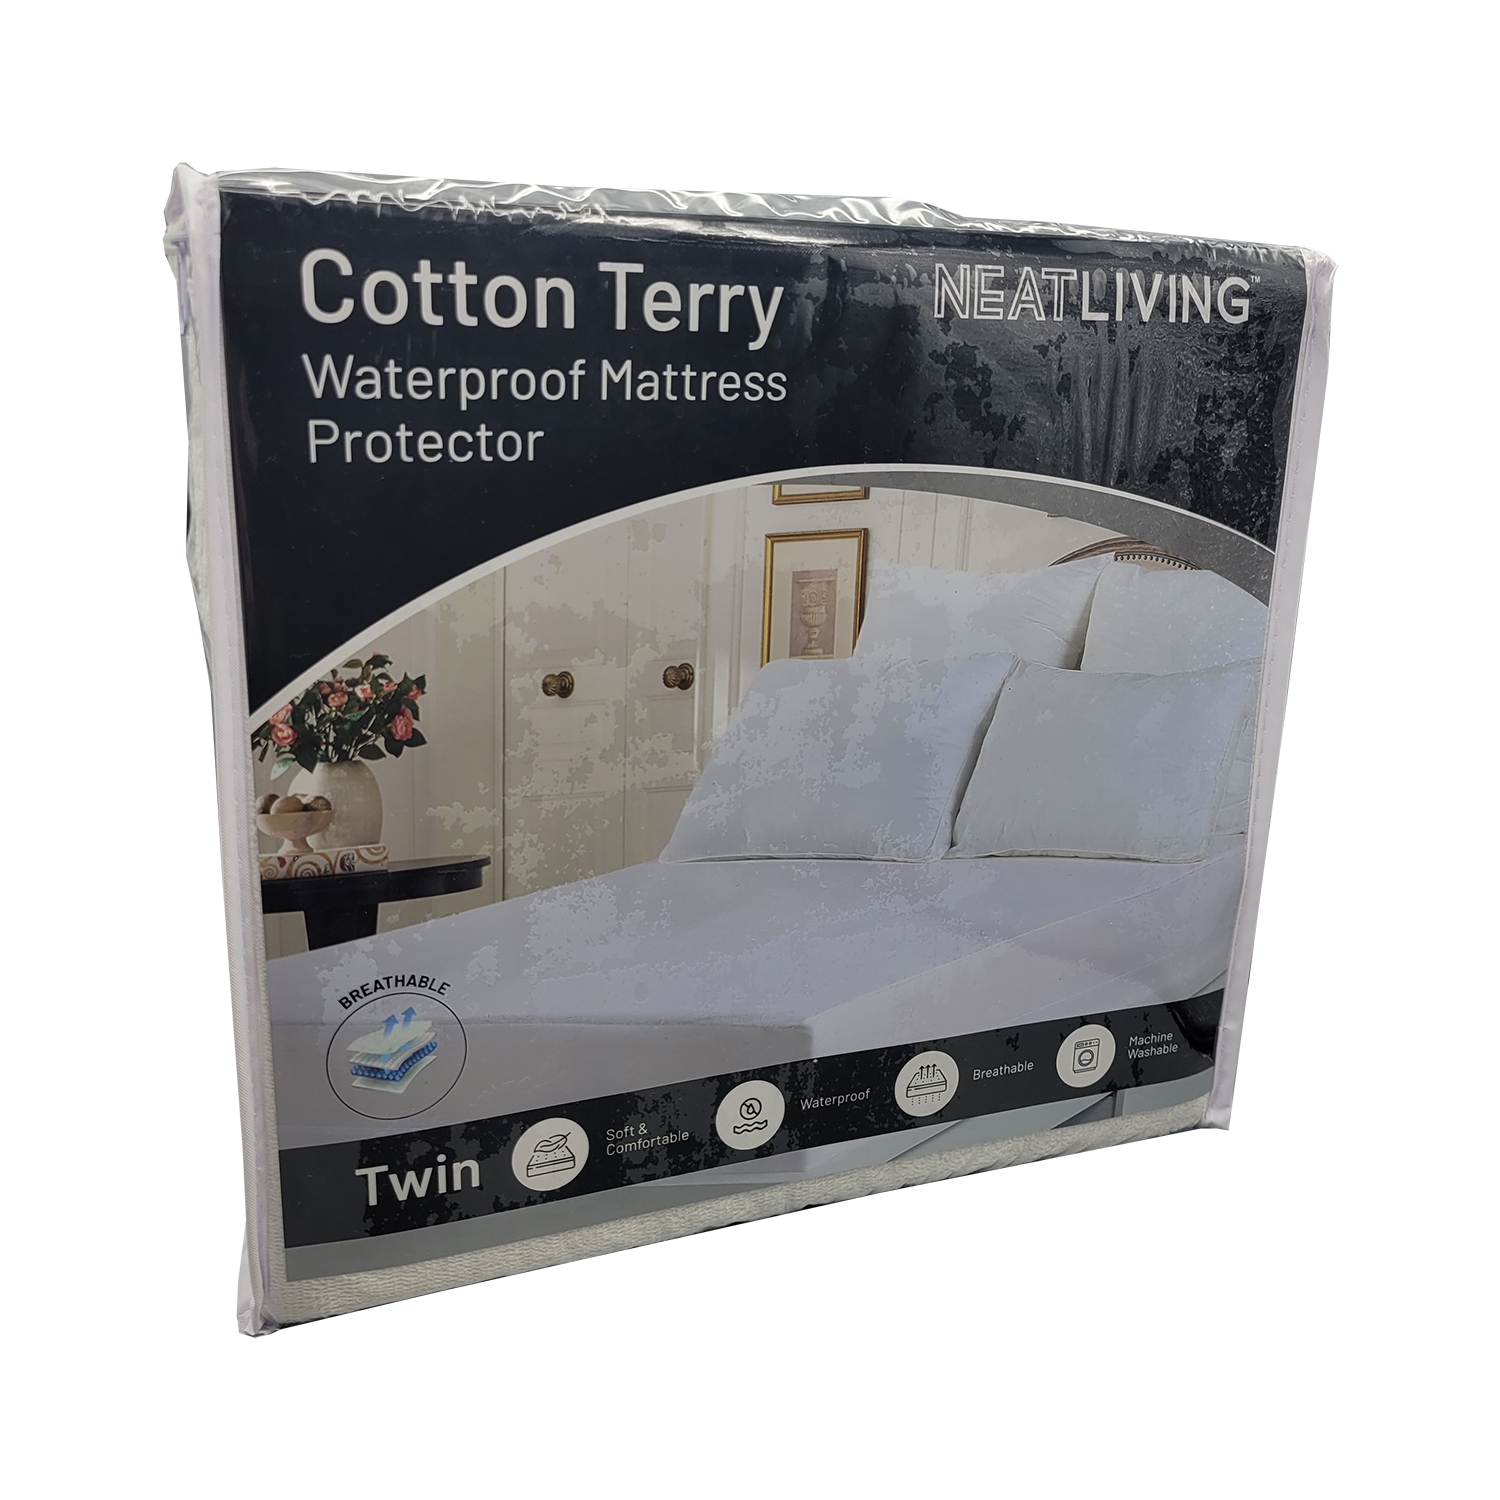 Neat-Living Cotton Terry Waterproof Mattress Protector, Assorted Sizes